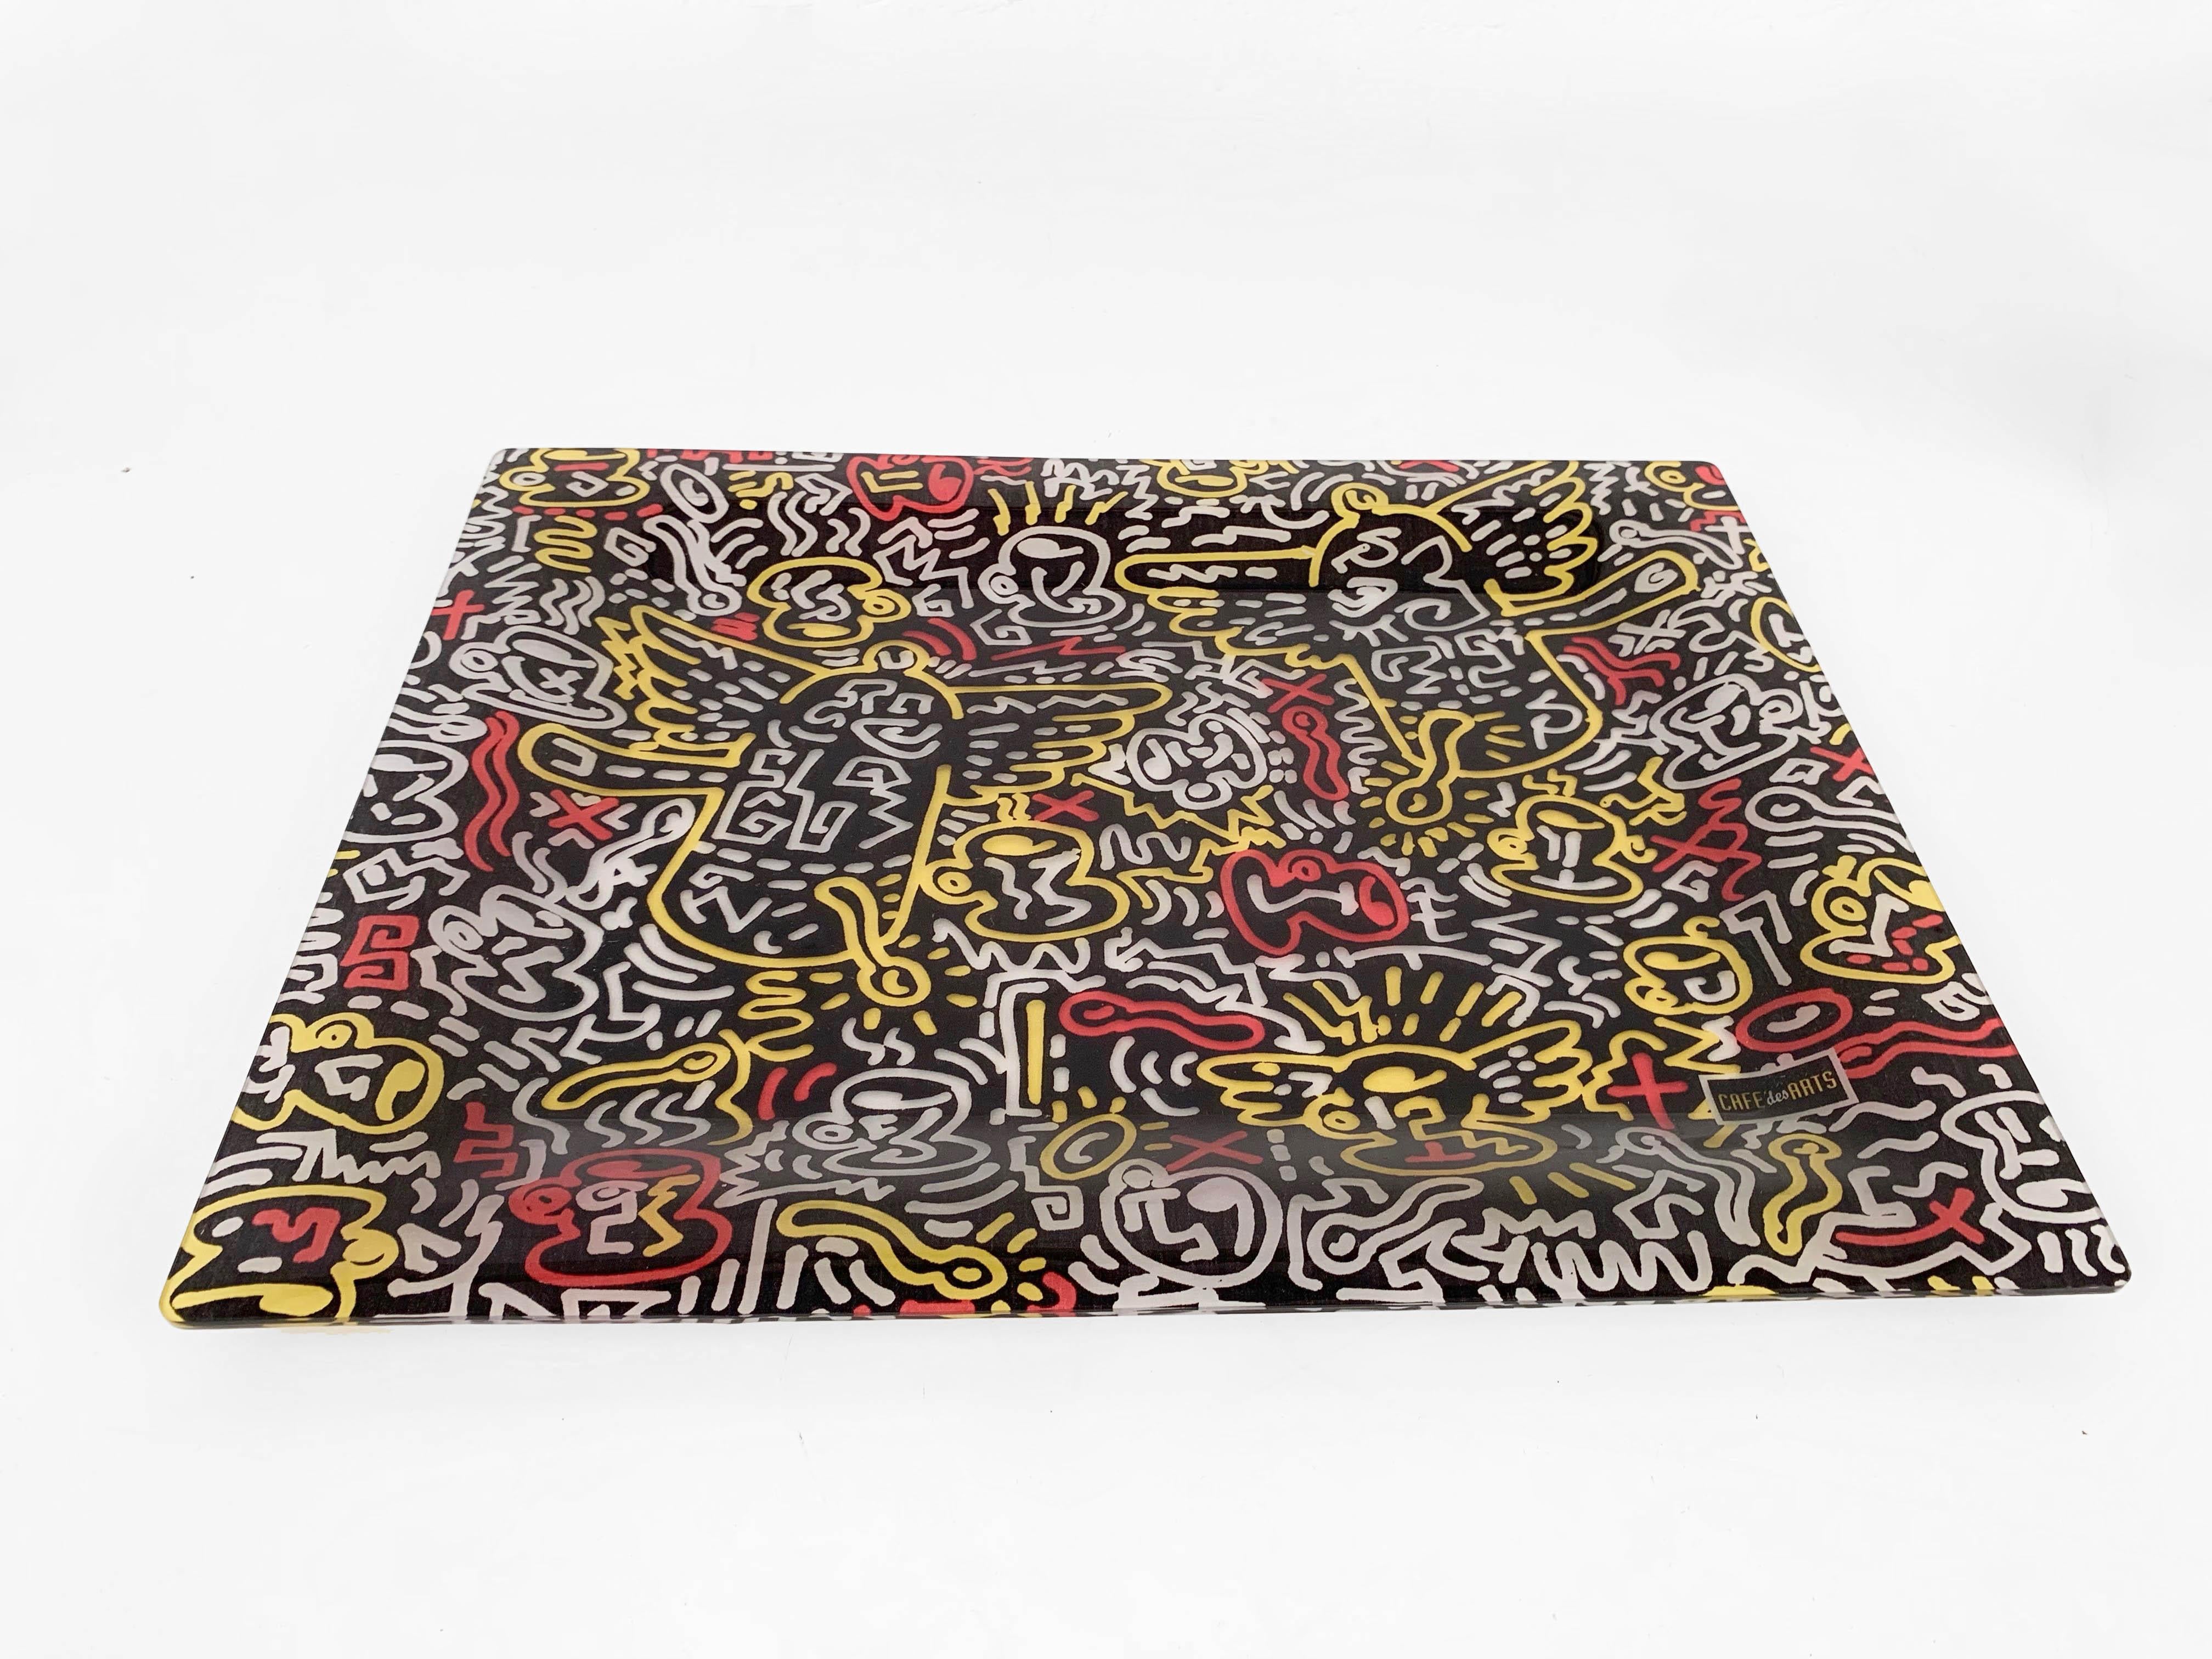 Wonderful midcentury Pop Art serving tray midcentury. This amazing piece of serveware, is made after Keith Haring with the design of Cafe 'des Arts.

This amazing piece is completely handmade and finished by hand.

This item is in good general